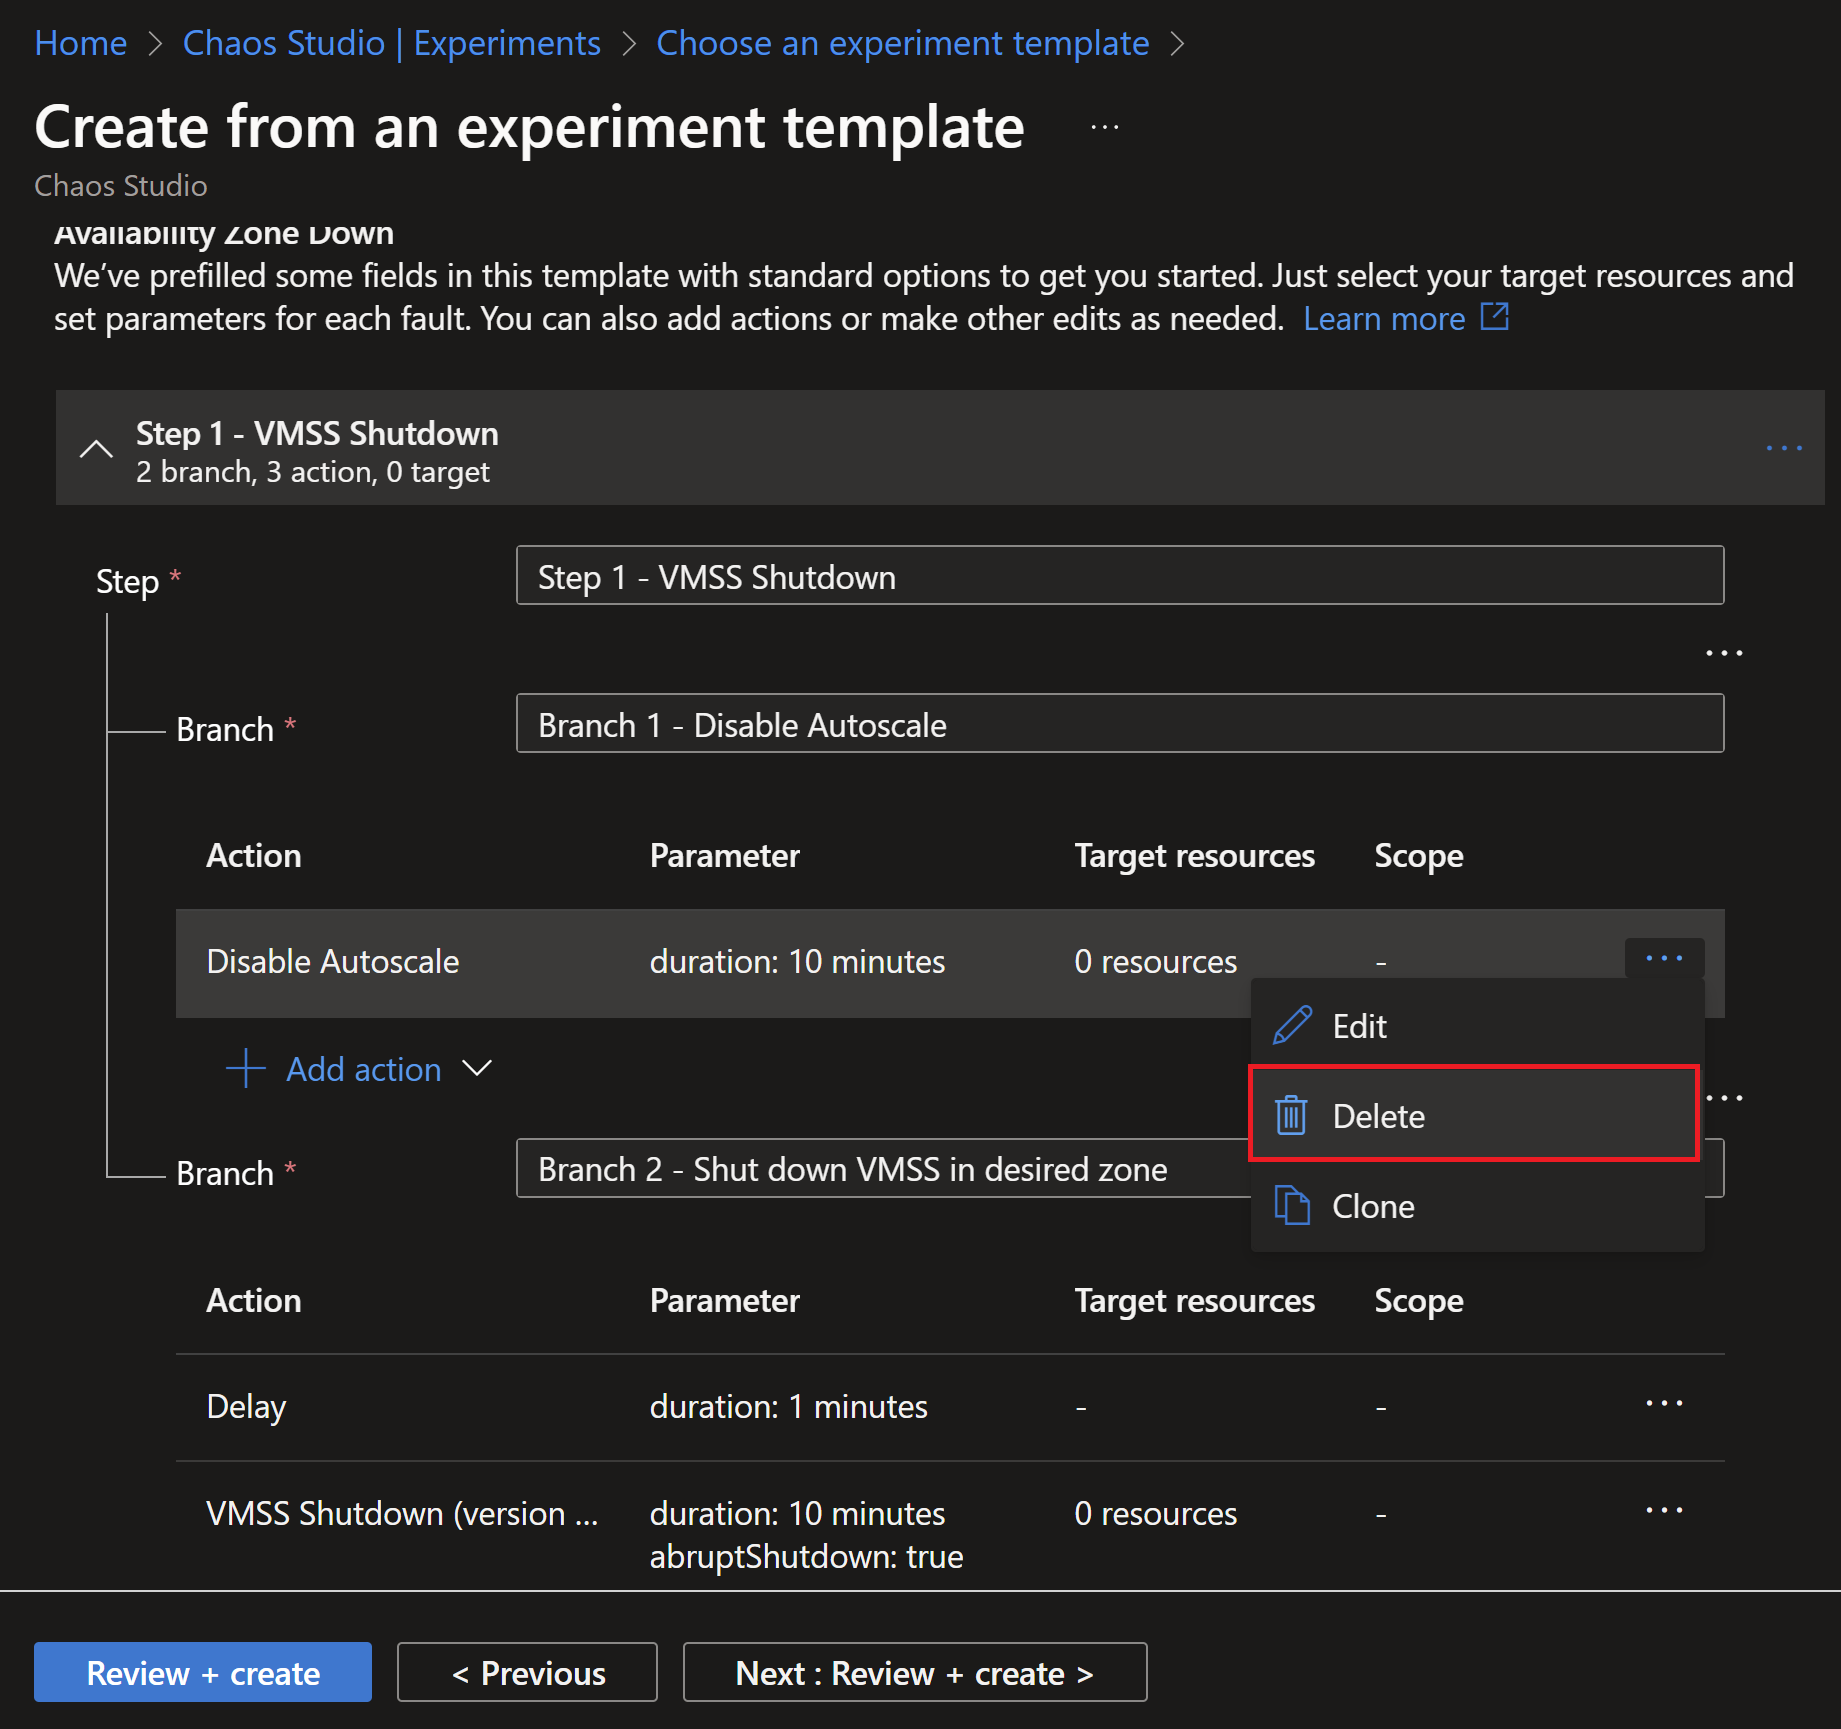 Screenshot showing editing the experiment actions by deleting the disable autoscale step